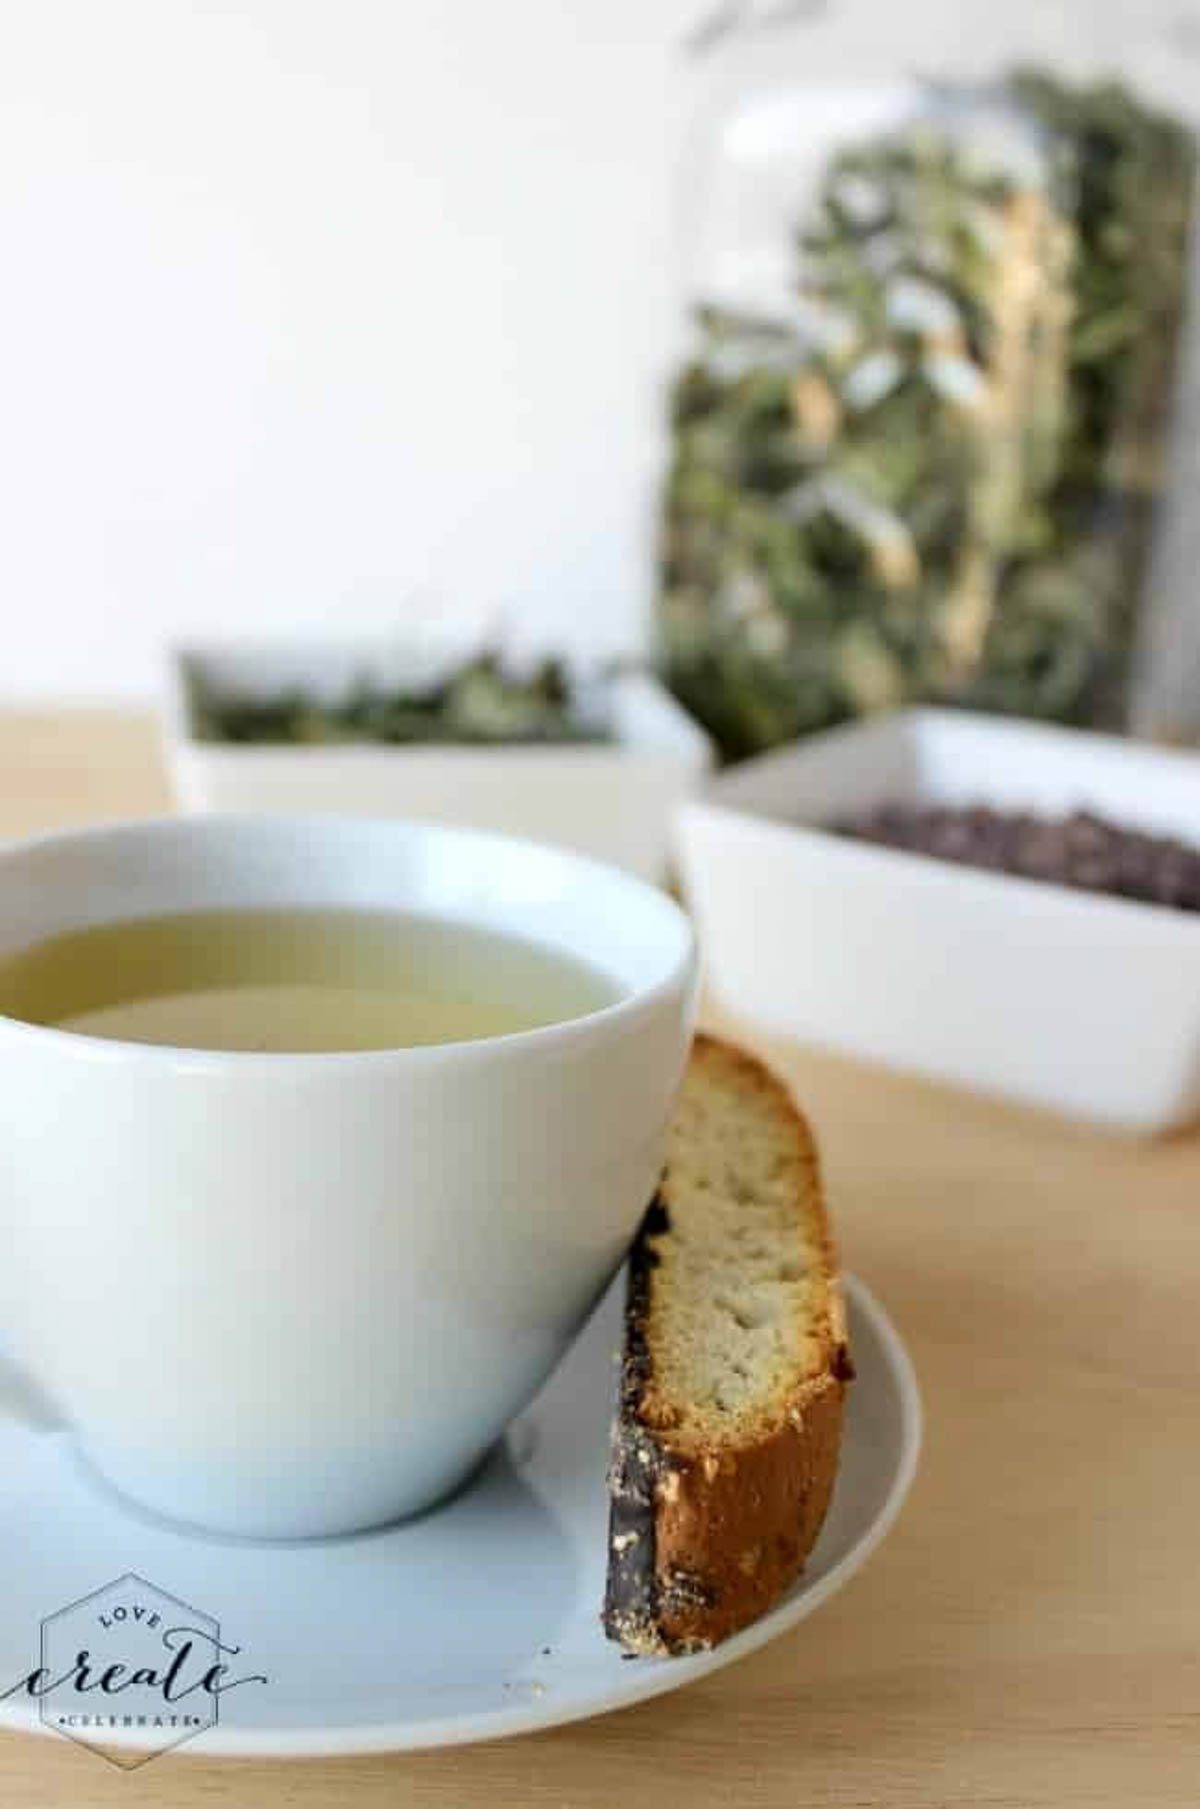 Cup of tea with a biscotti and bowls of herbs.